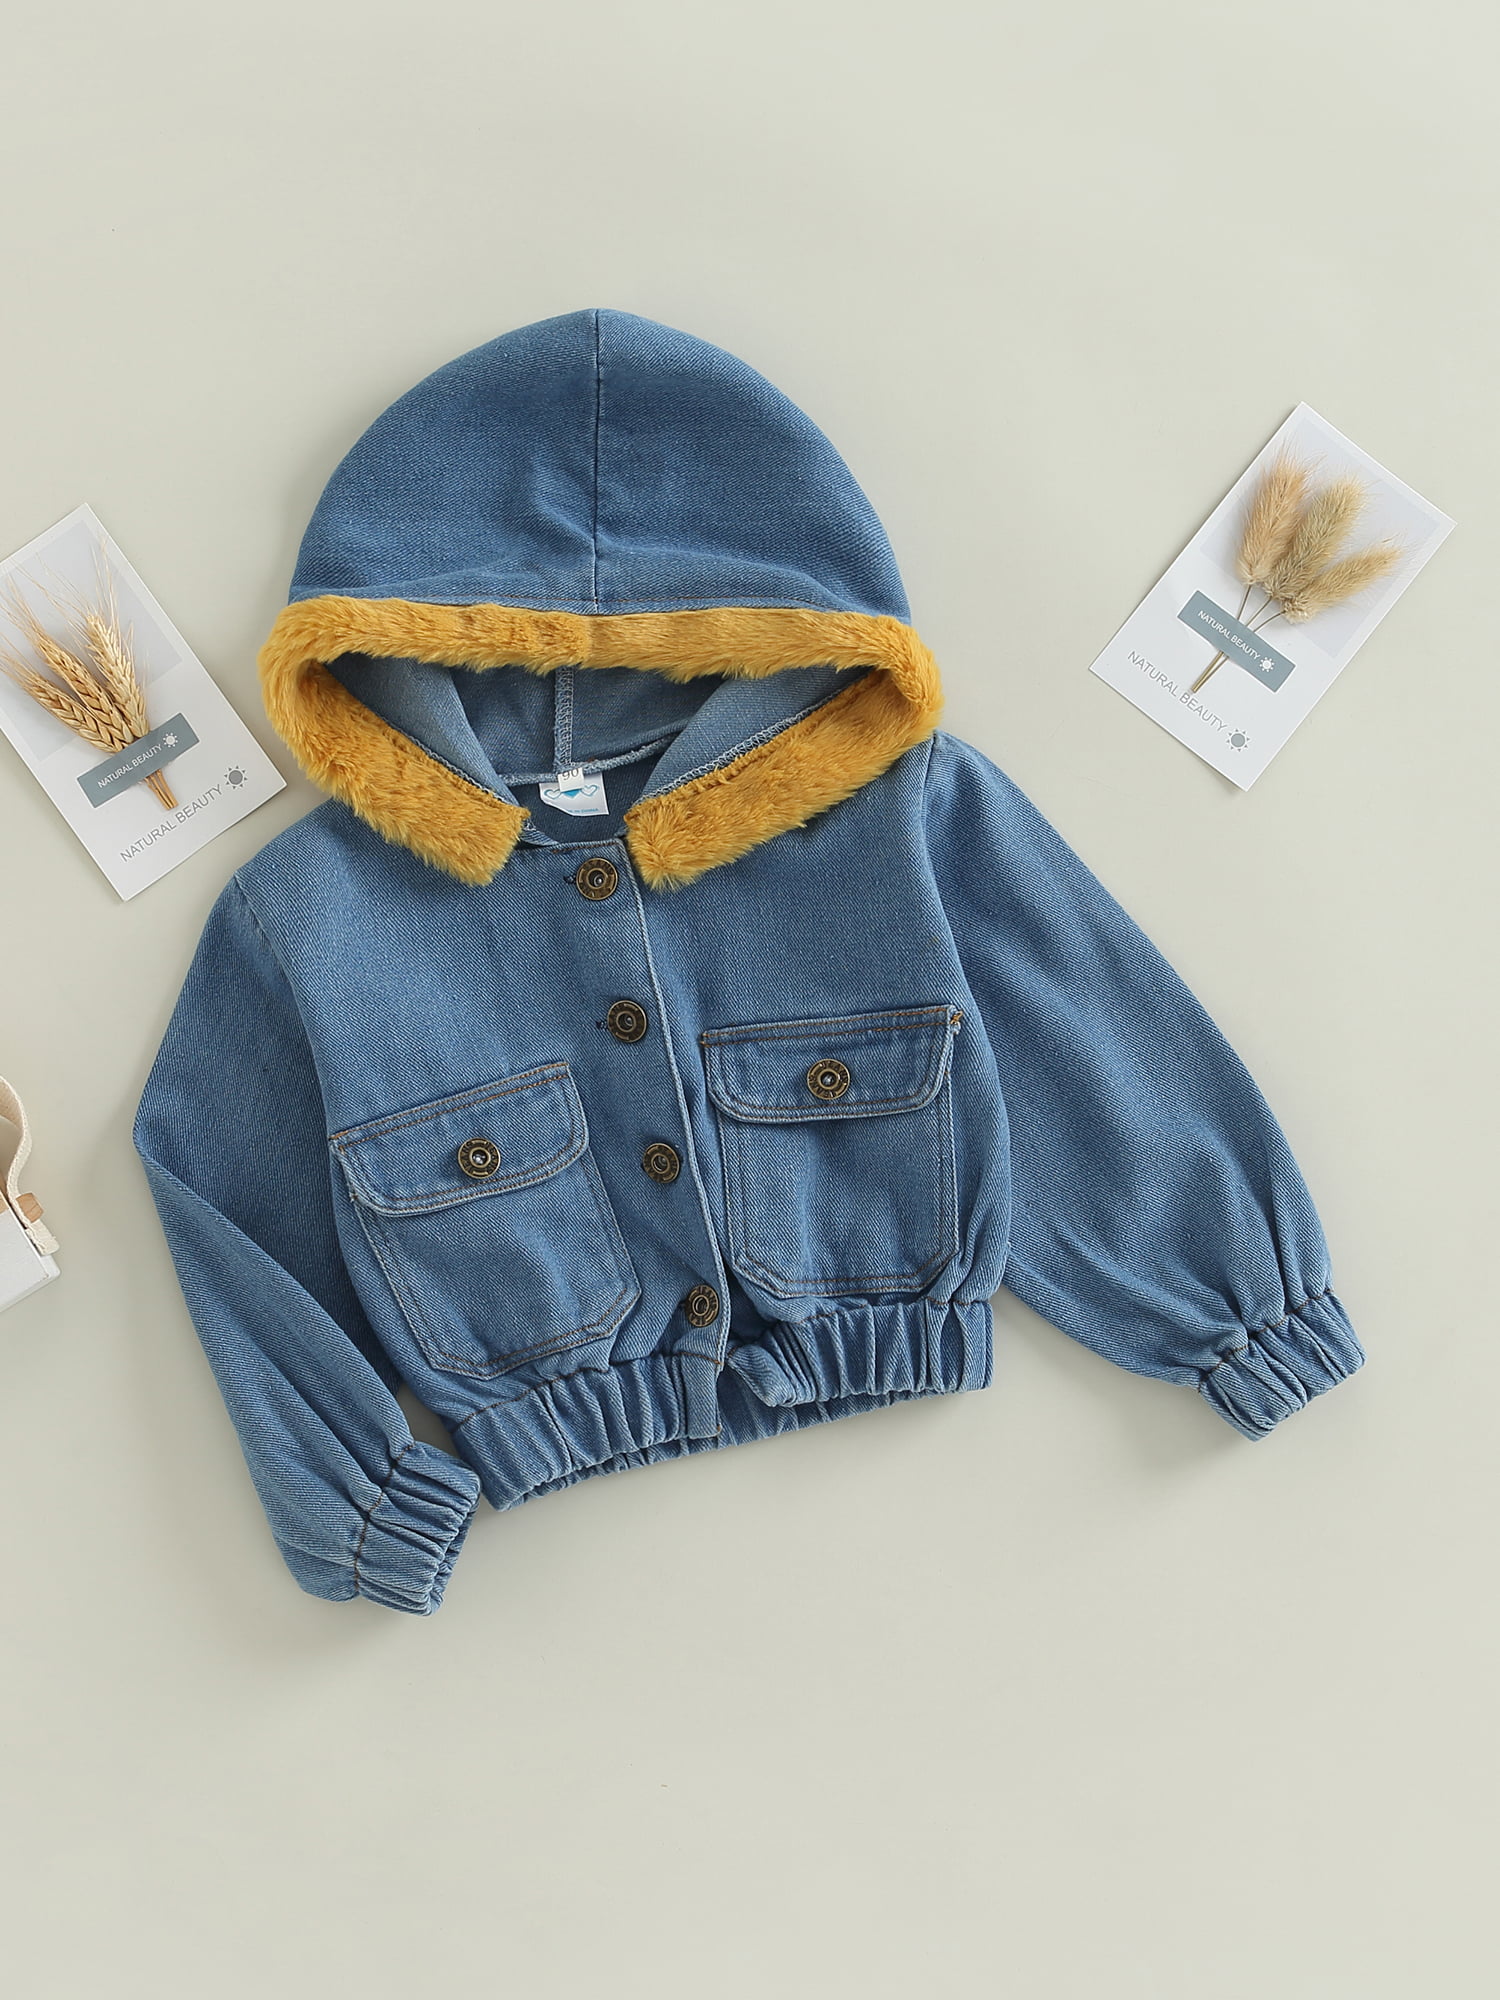 Toddler Baby Denim Jacket for Girls, Blue Long Sleeve Single Breasted Hooded Coat with Flap Pockets - image 3 of 6